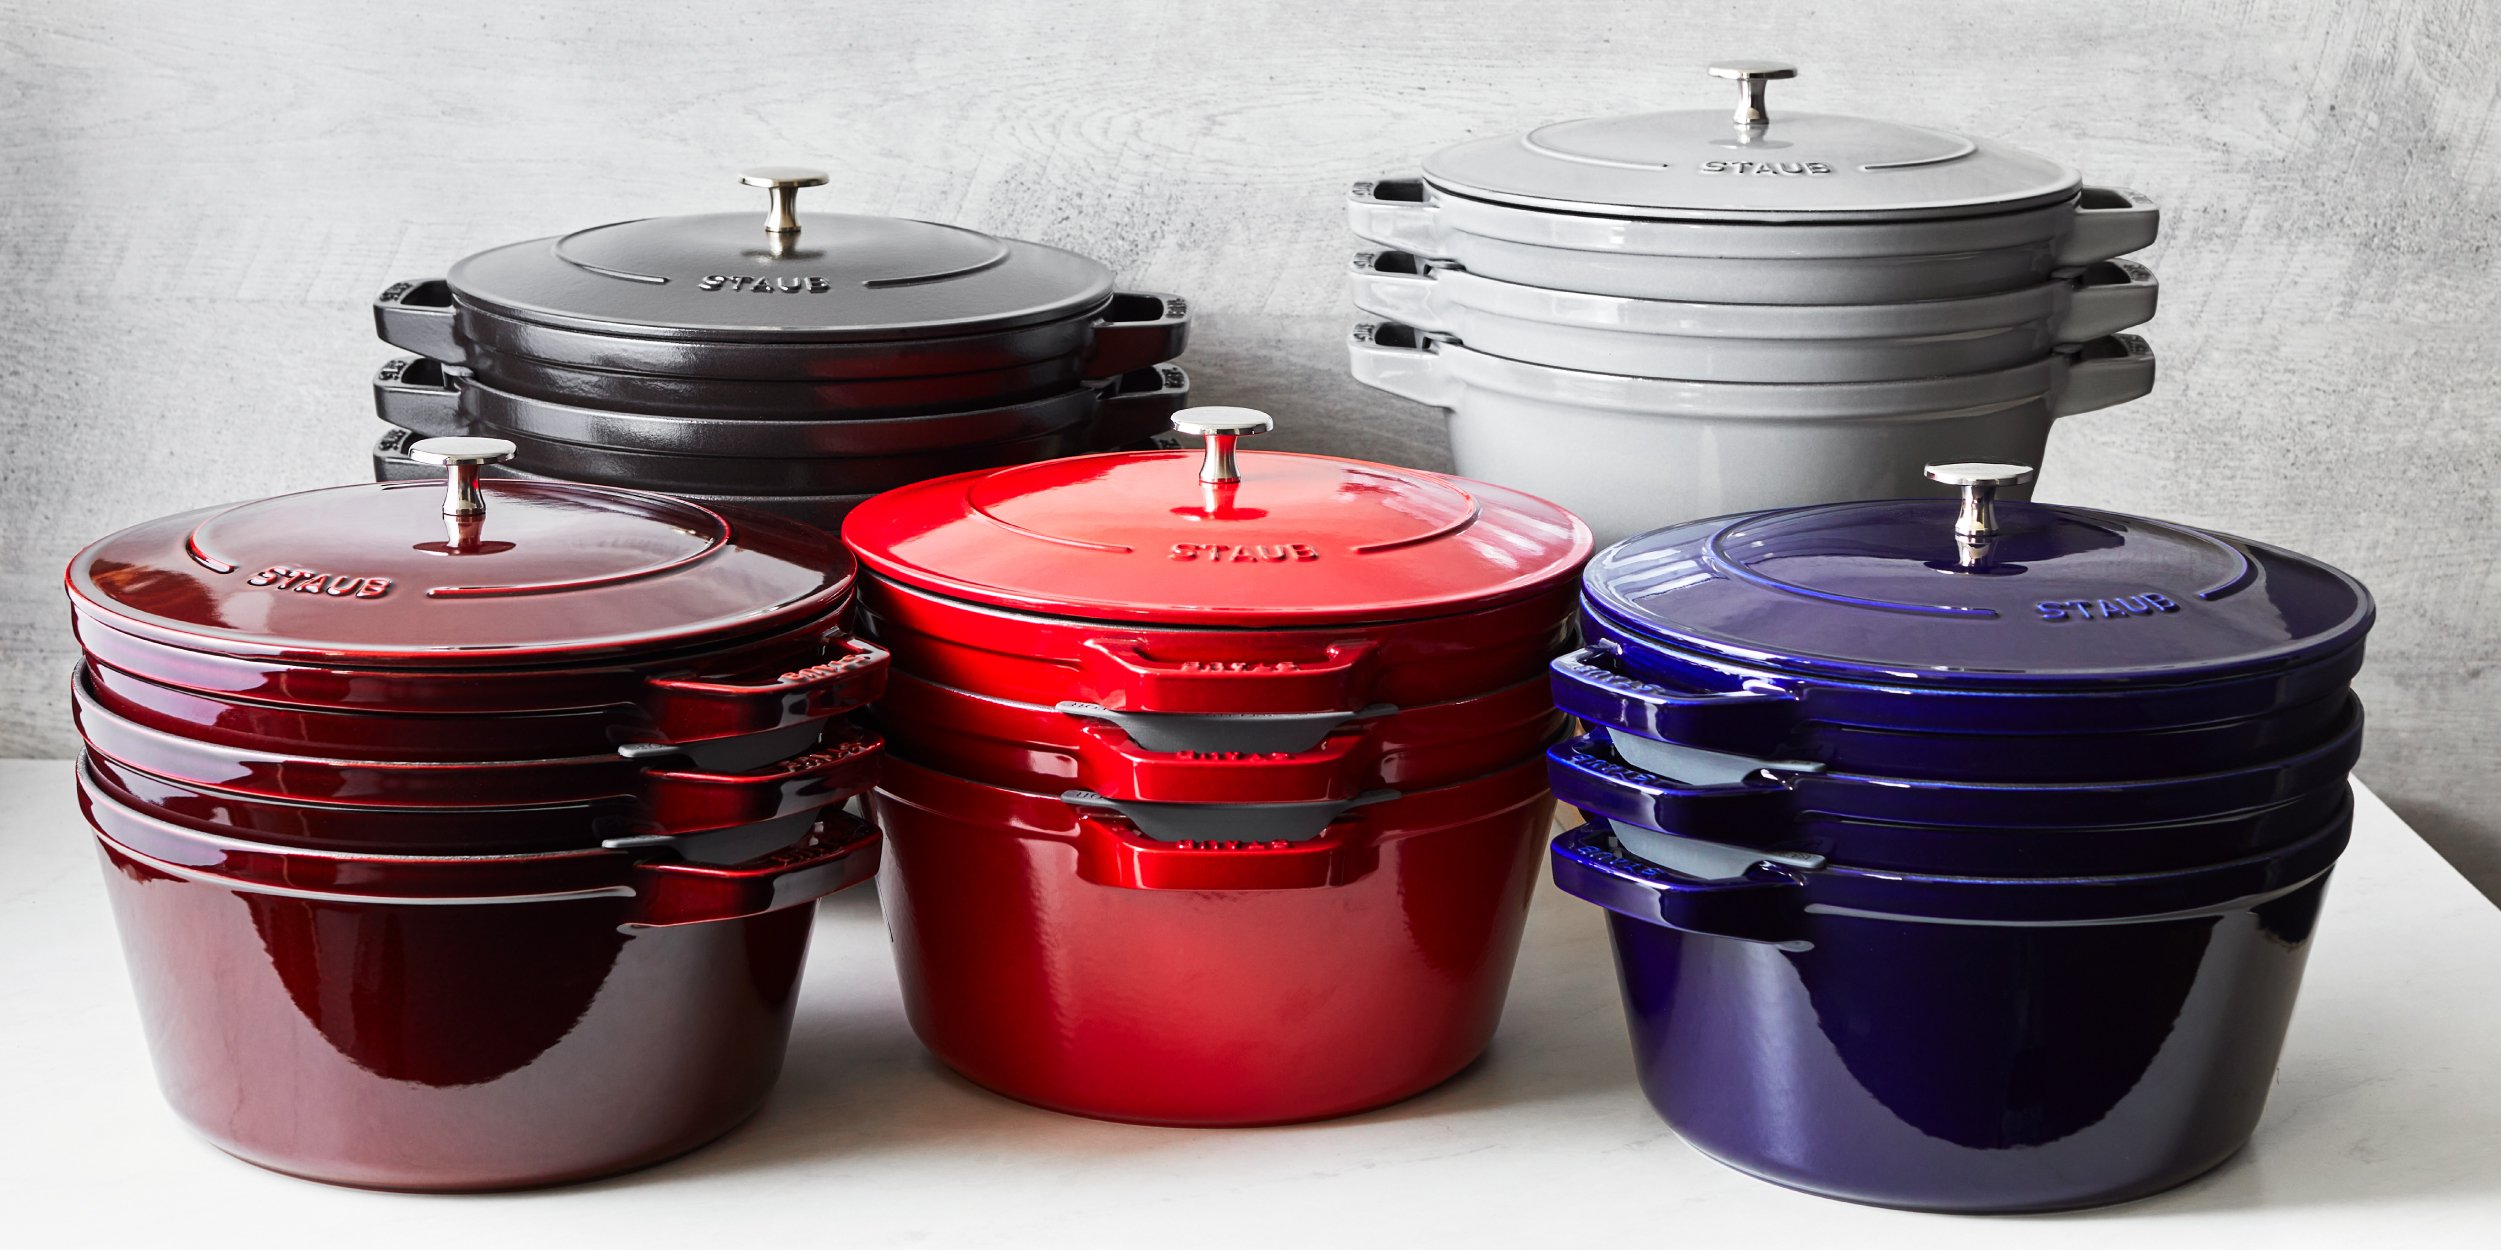 https://www.zwilling.com/on/demandware.static/-/Sites-zwilling-us-Library/default/dwc320a8f8/images/product-content/masonry-content/staub/cast-iron/stackable/Stack_Mason_Comp_1200-600_StackMasonry.jpg